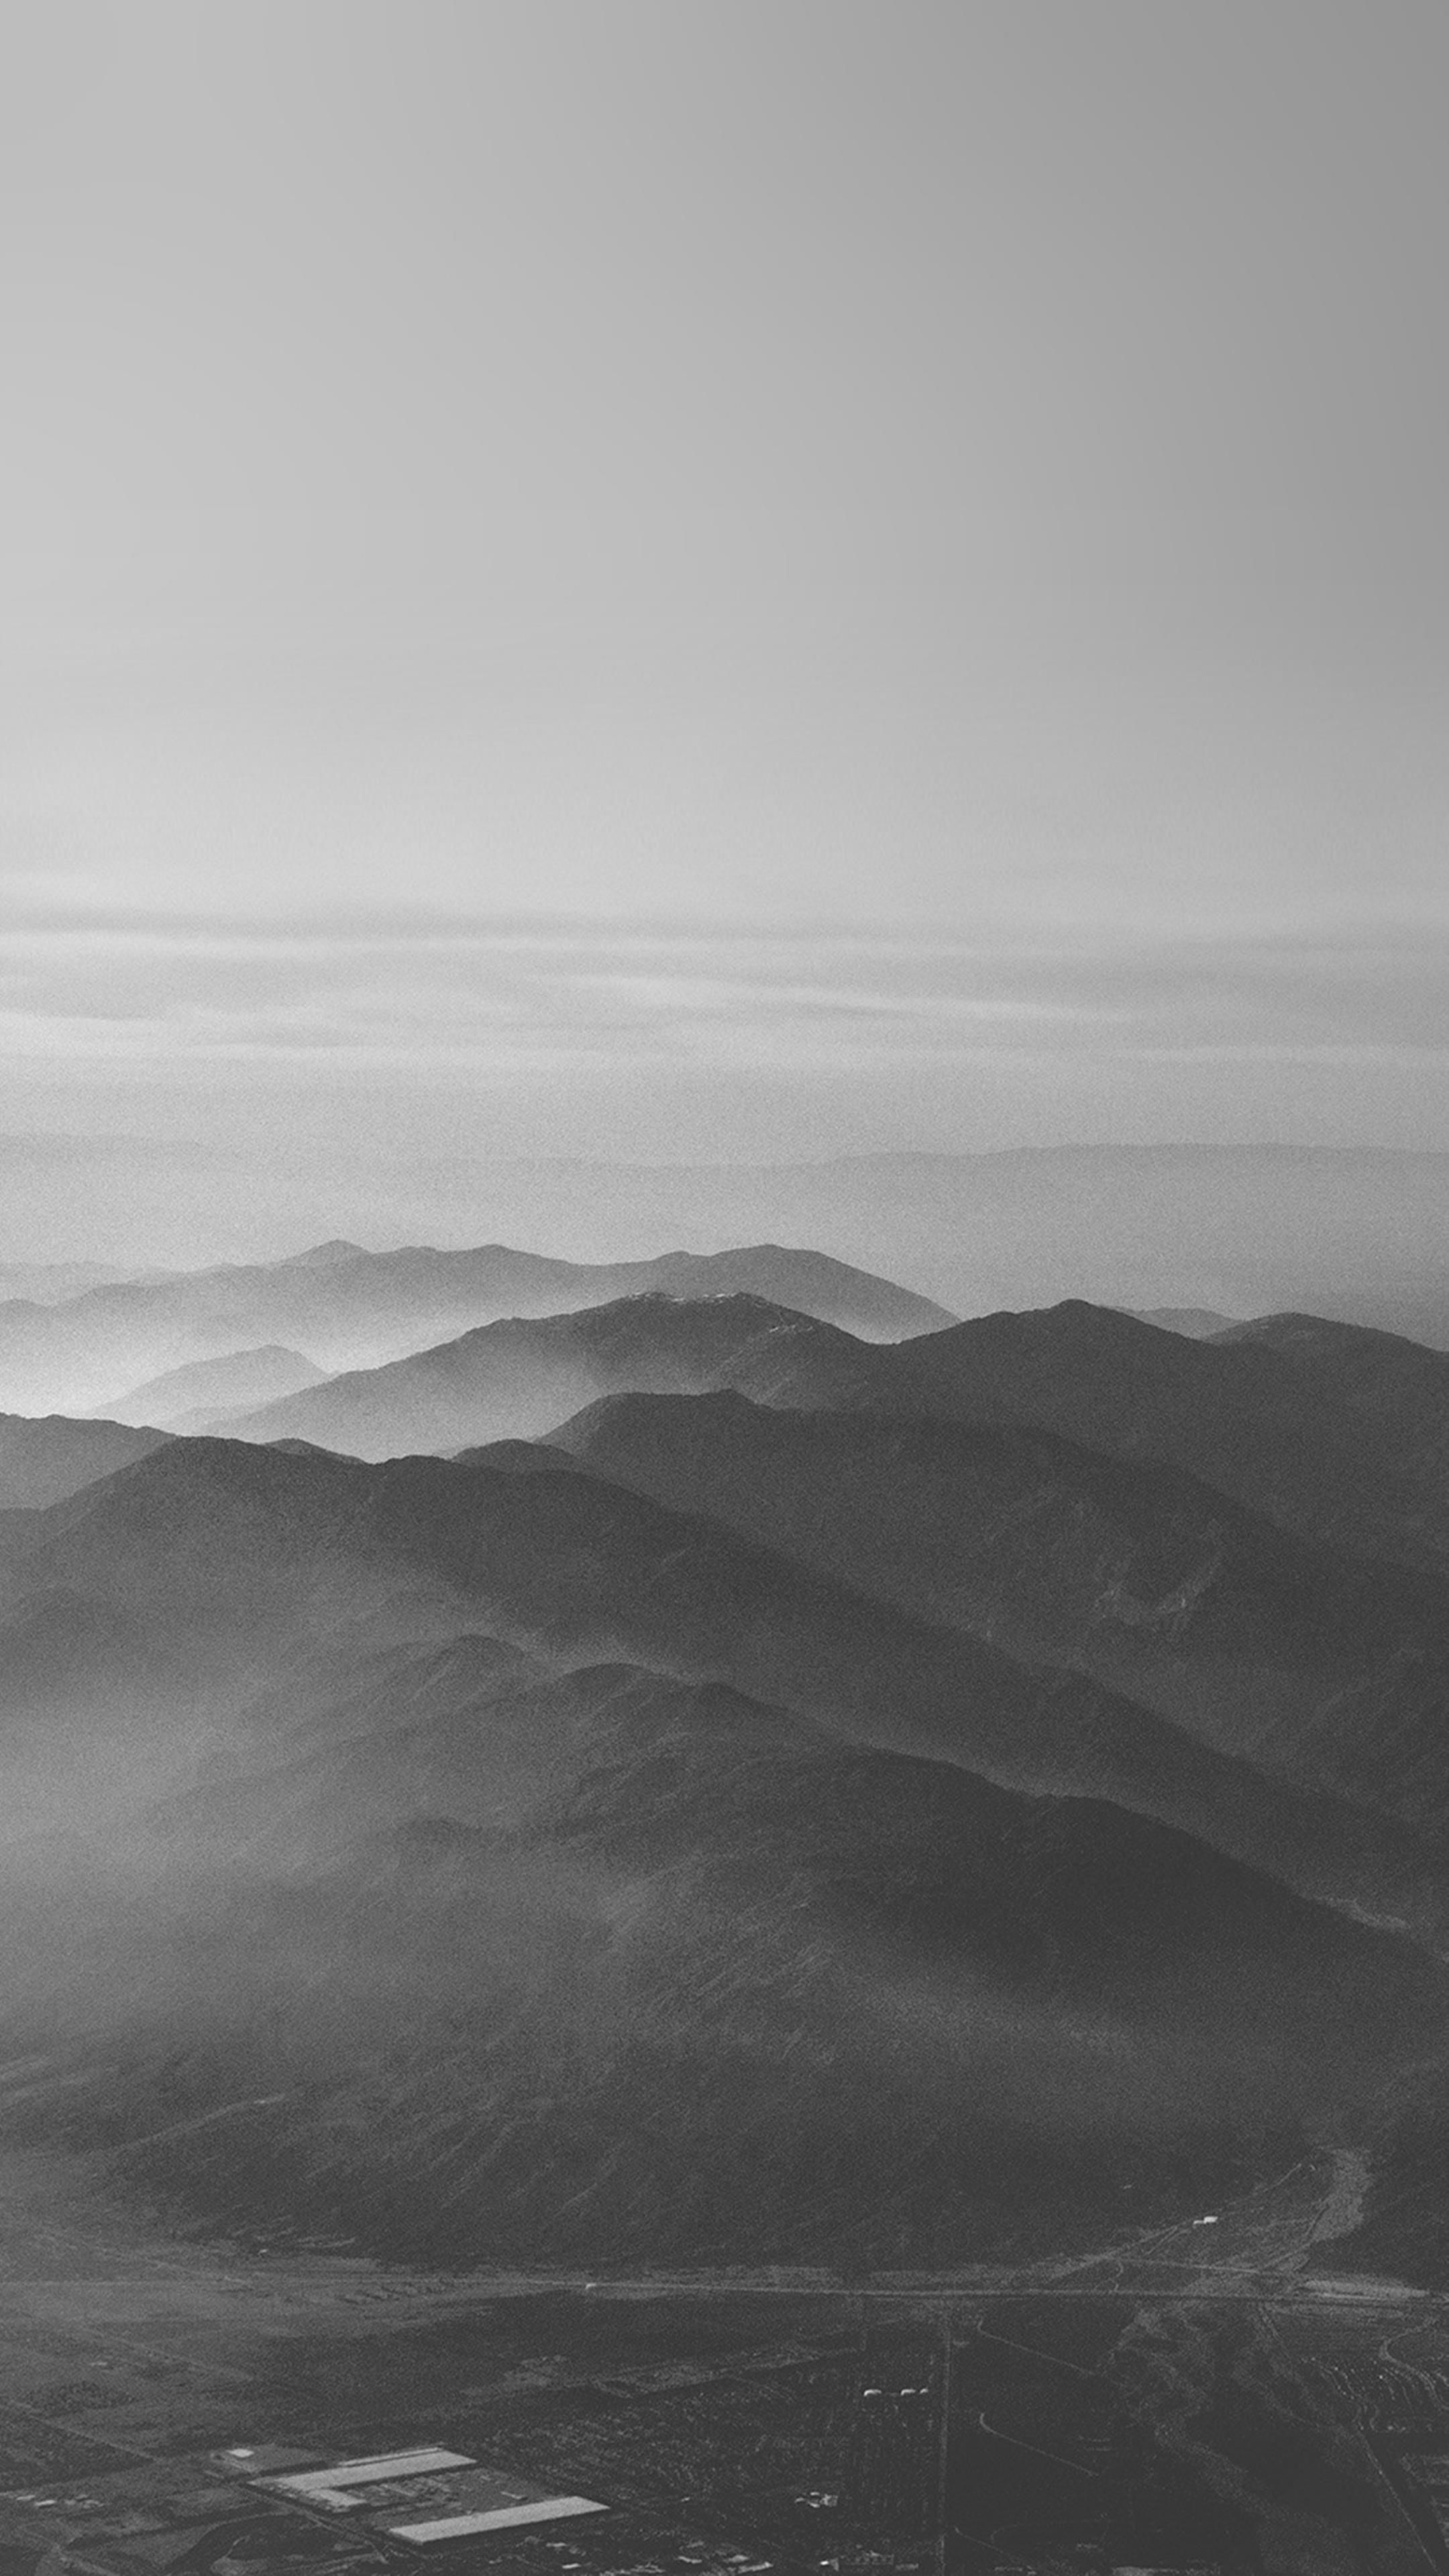 A black and white image of a mountain range - Nature, fog